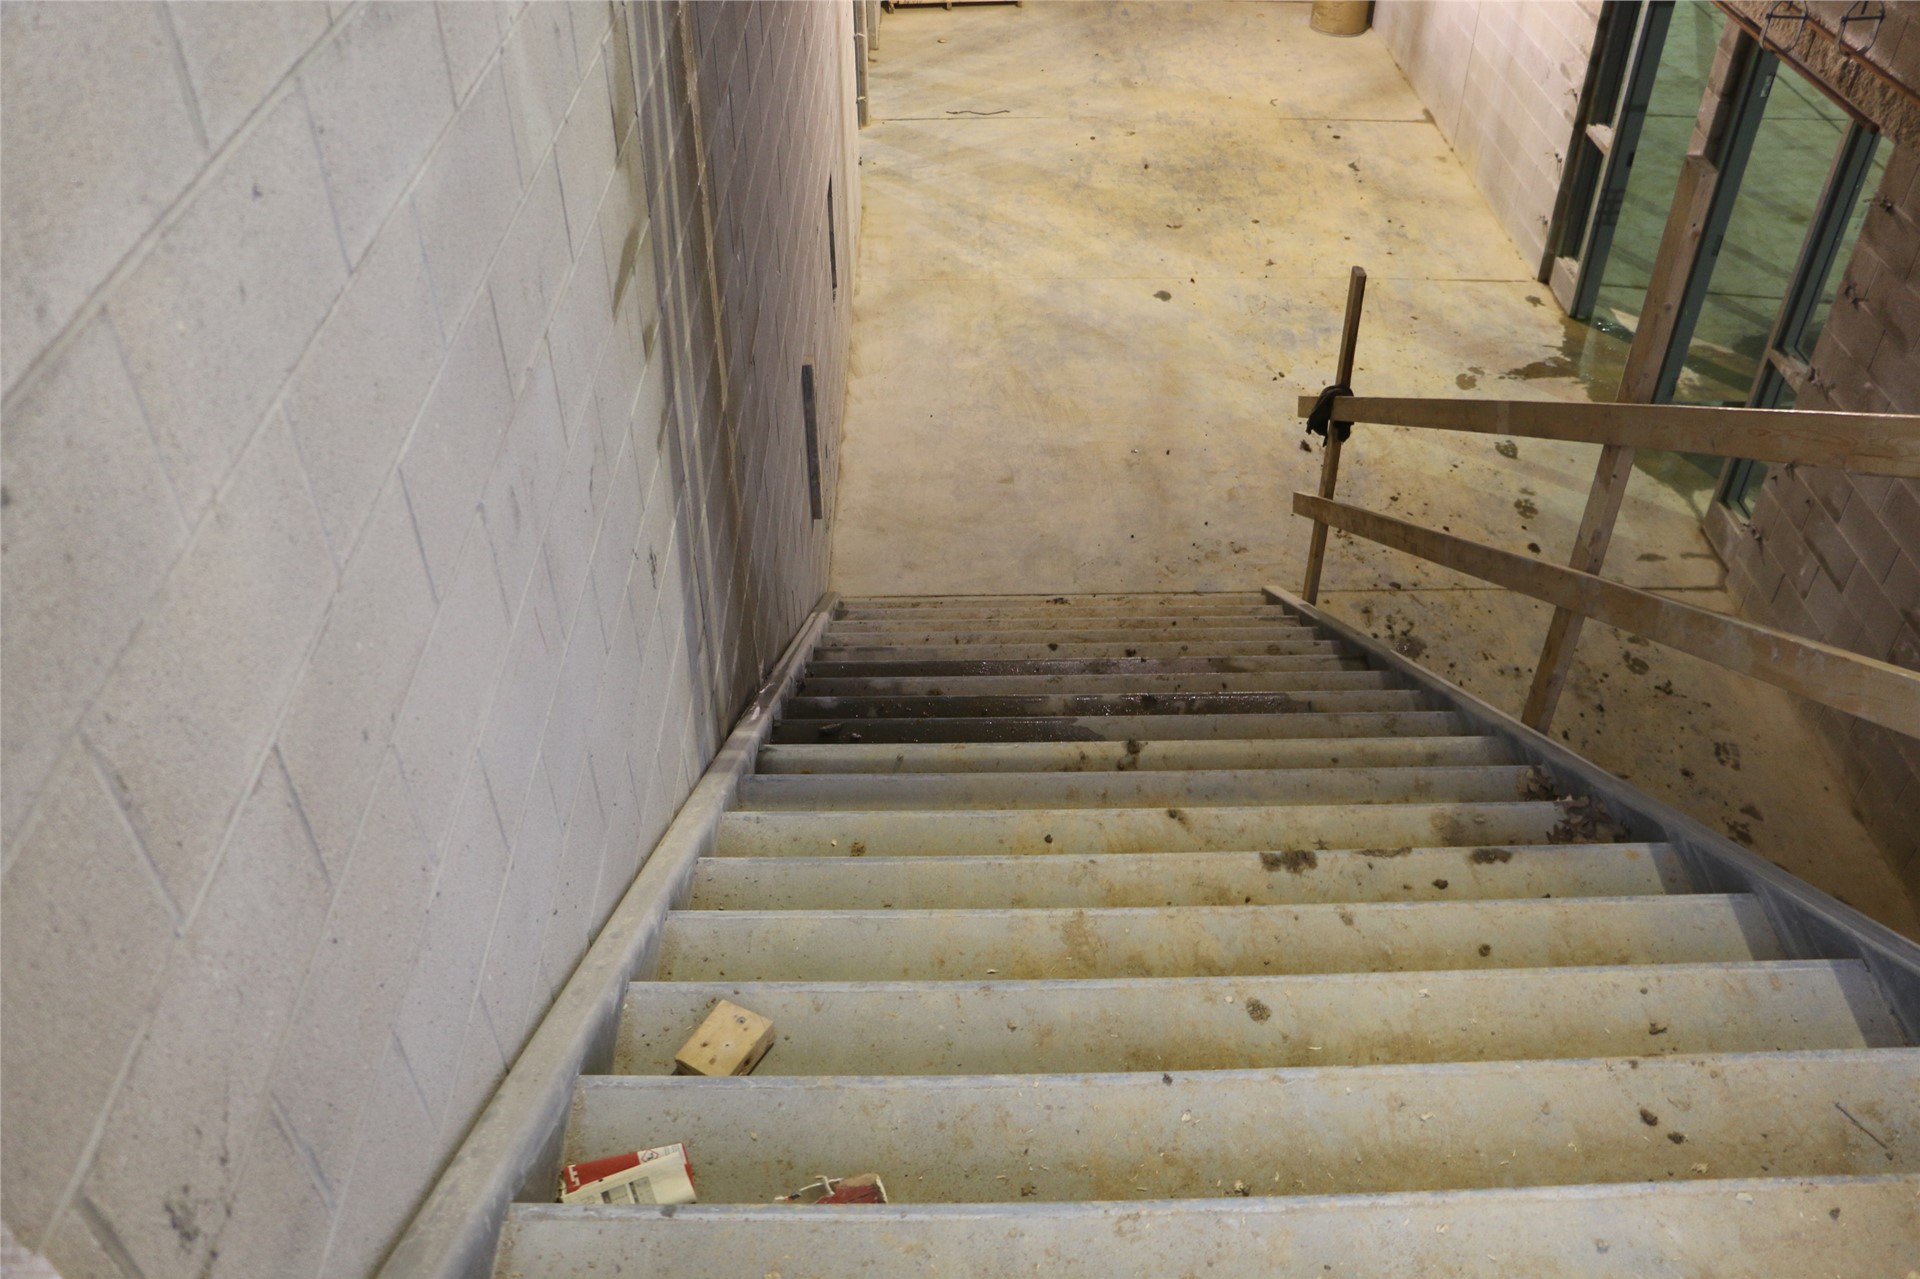 The stairs are wide to accommodate current building codes and flow